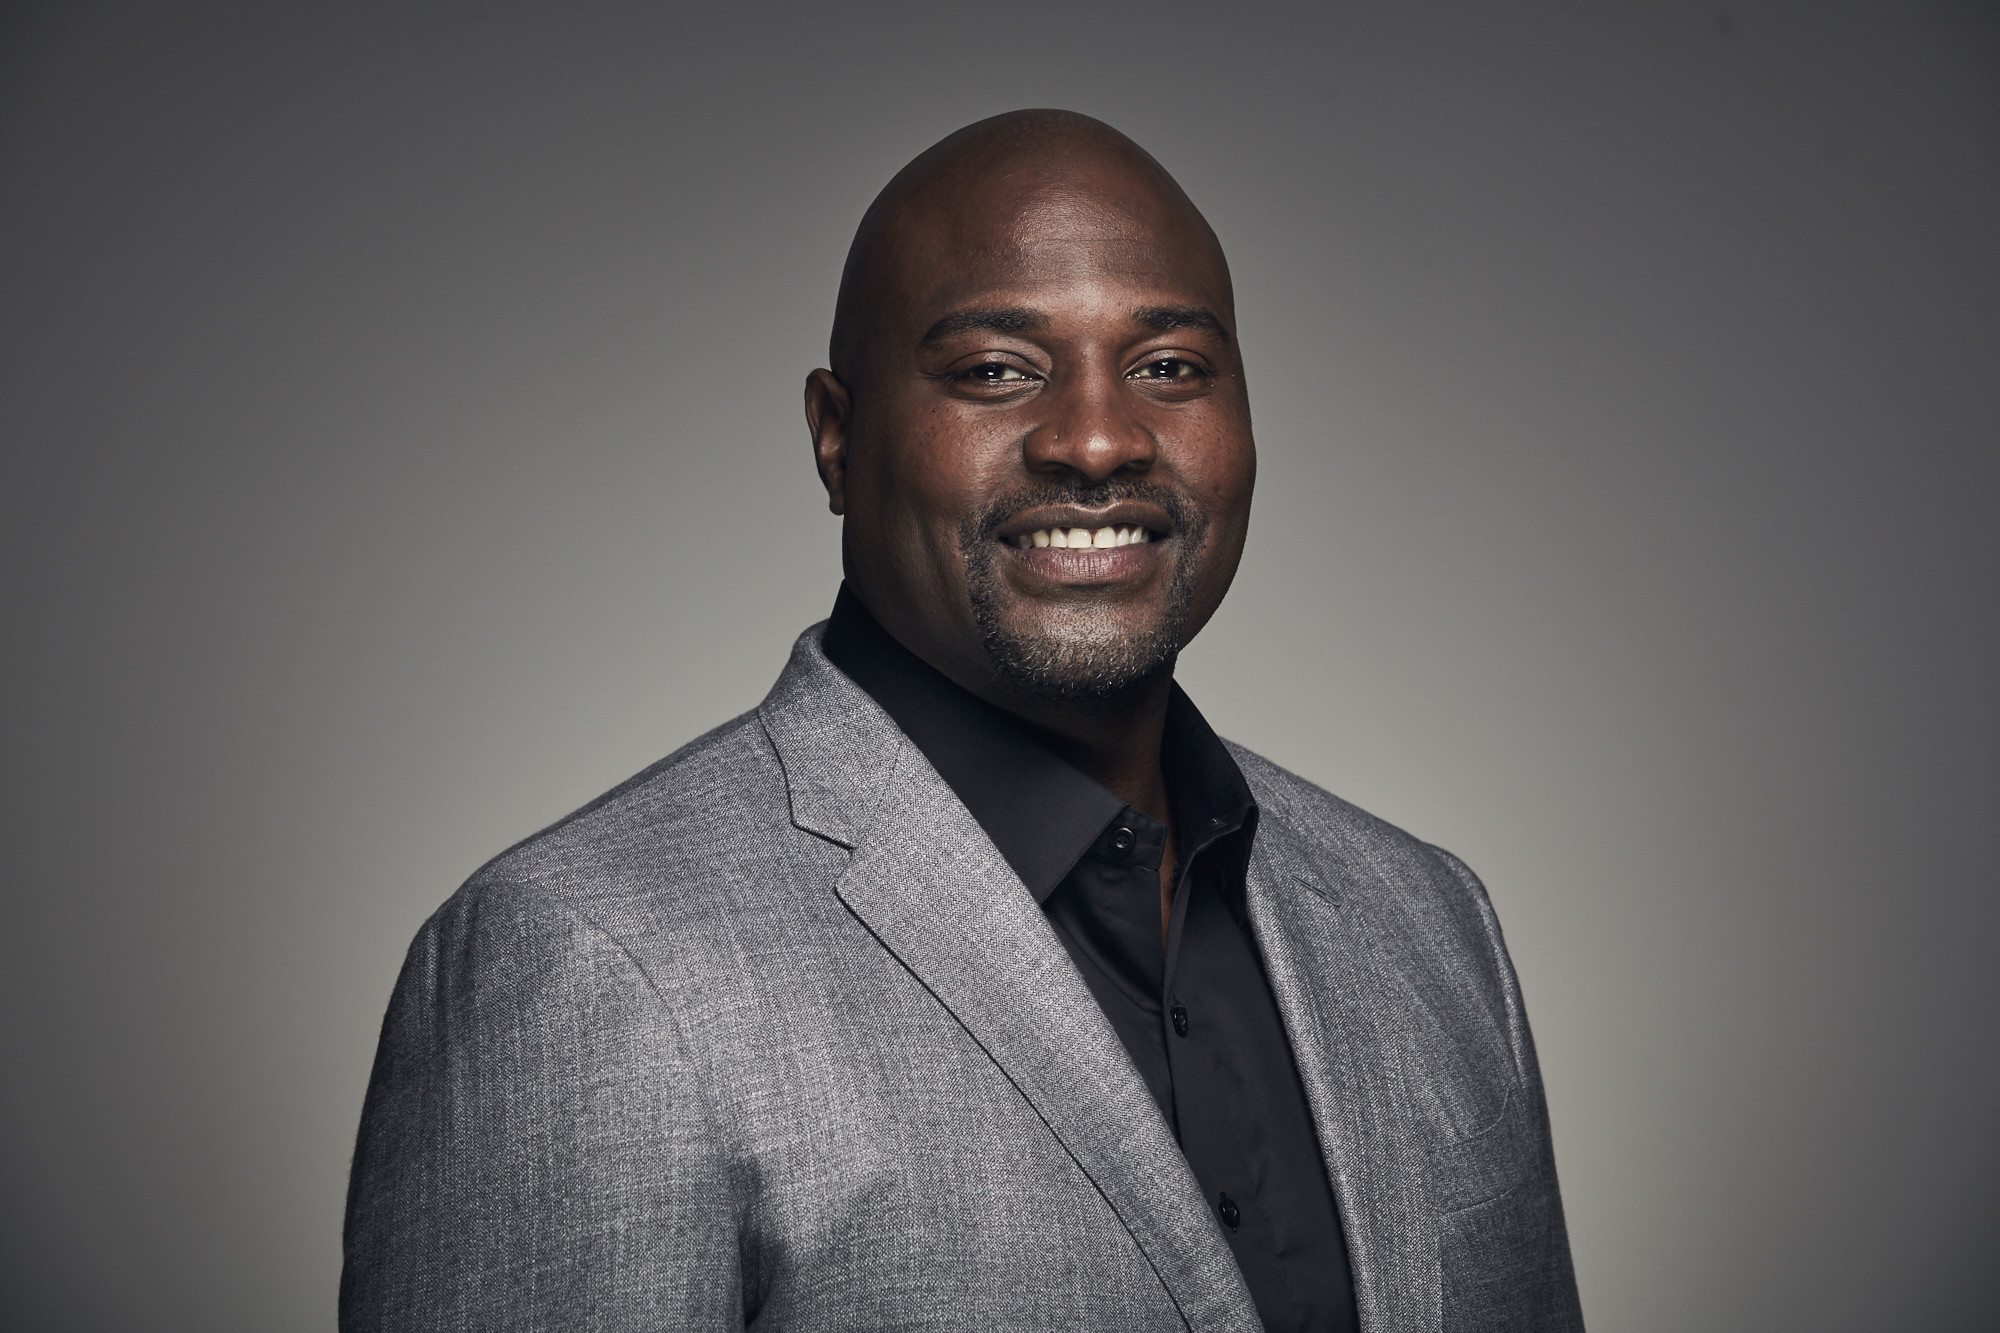 speak for yourself marcellus wiley